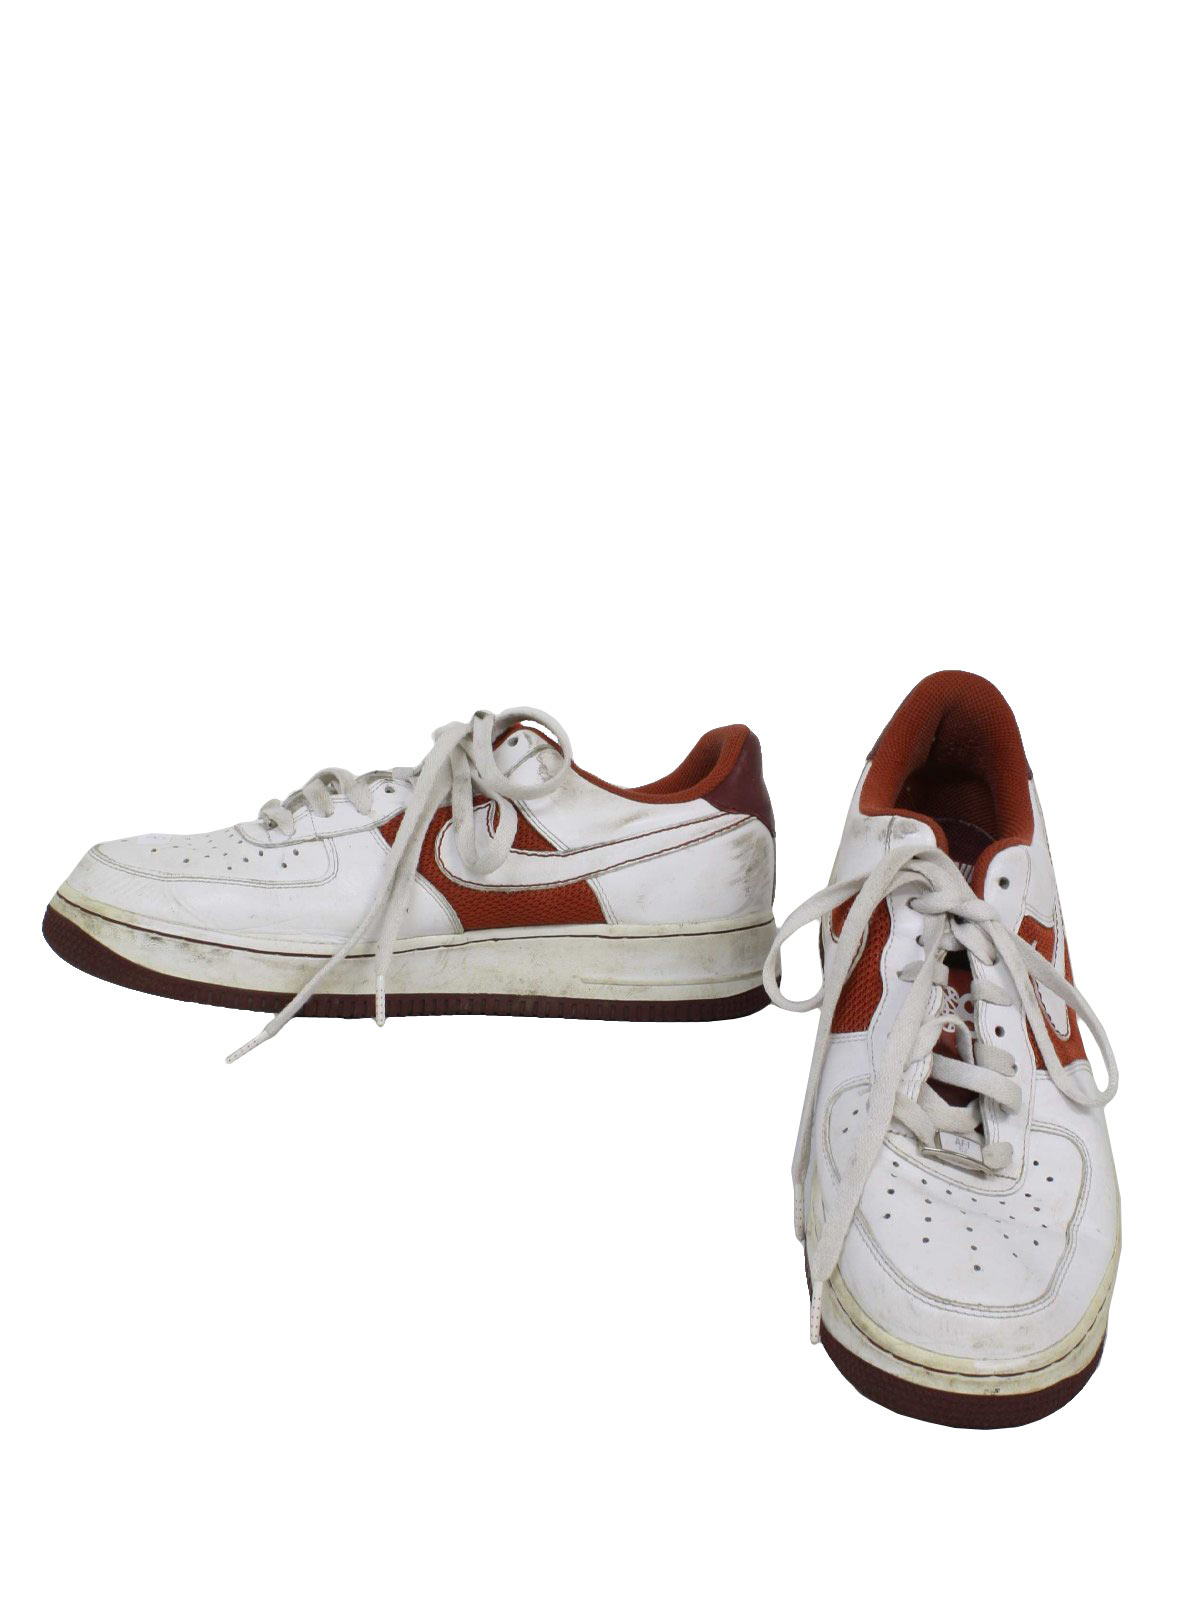 Vintage 1990's Shoes: 90s -Nike Air- Mens white and shaded brick classic  old school style tennis shoes with -AF1 82- bridge at lower laces and  glossy -410- back. Shoes show light wear